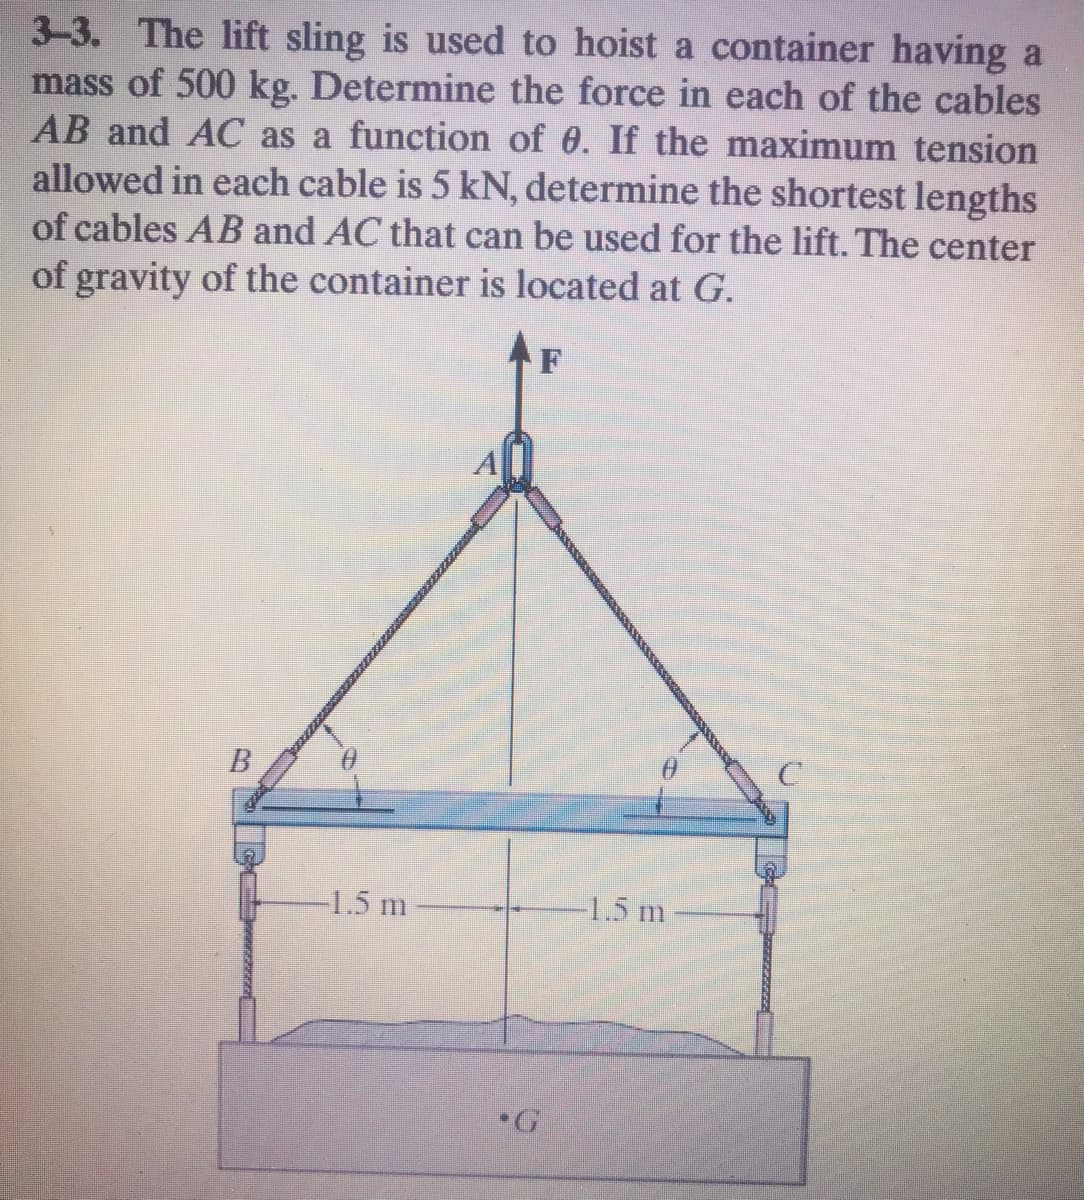 3-3. The lift sling is used to hoist a container having a
mass of 500 kg. Determine the force in each of the cables
AB and AC as a function of 0. If the maximum tension
allowed in each cable is 5 kN, determine the shortest lengths
of cables AB and AC that can be used for the lift. The center
of gravity of the container is located at G.
F
-1.5 m
1.5 m
